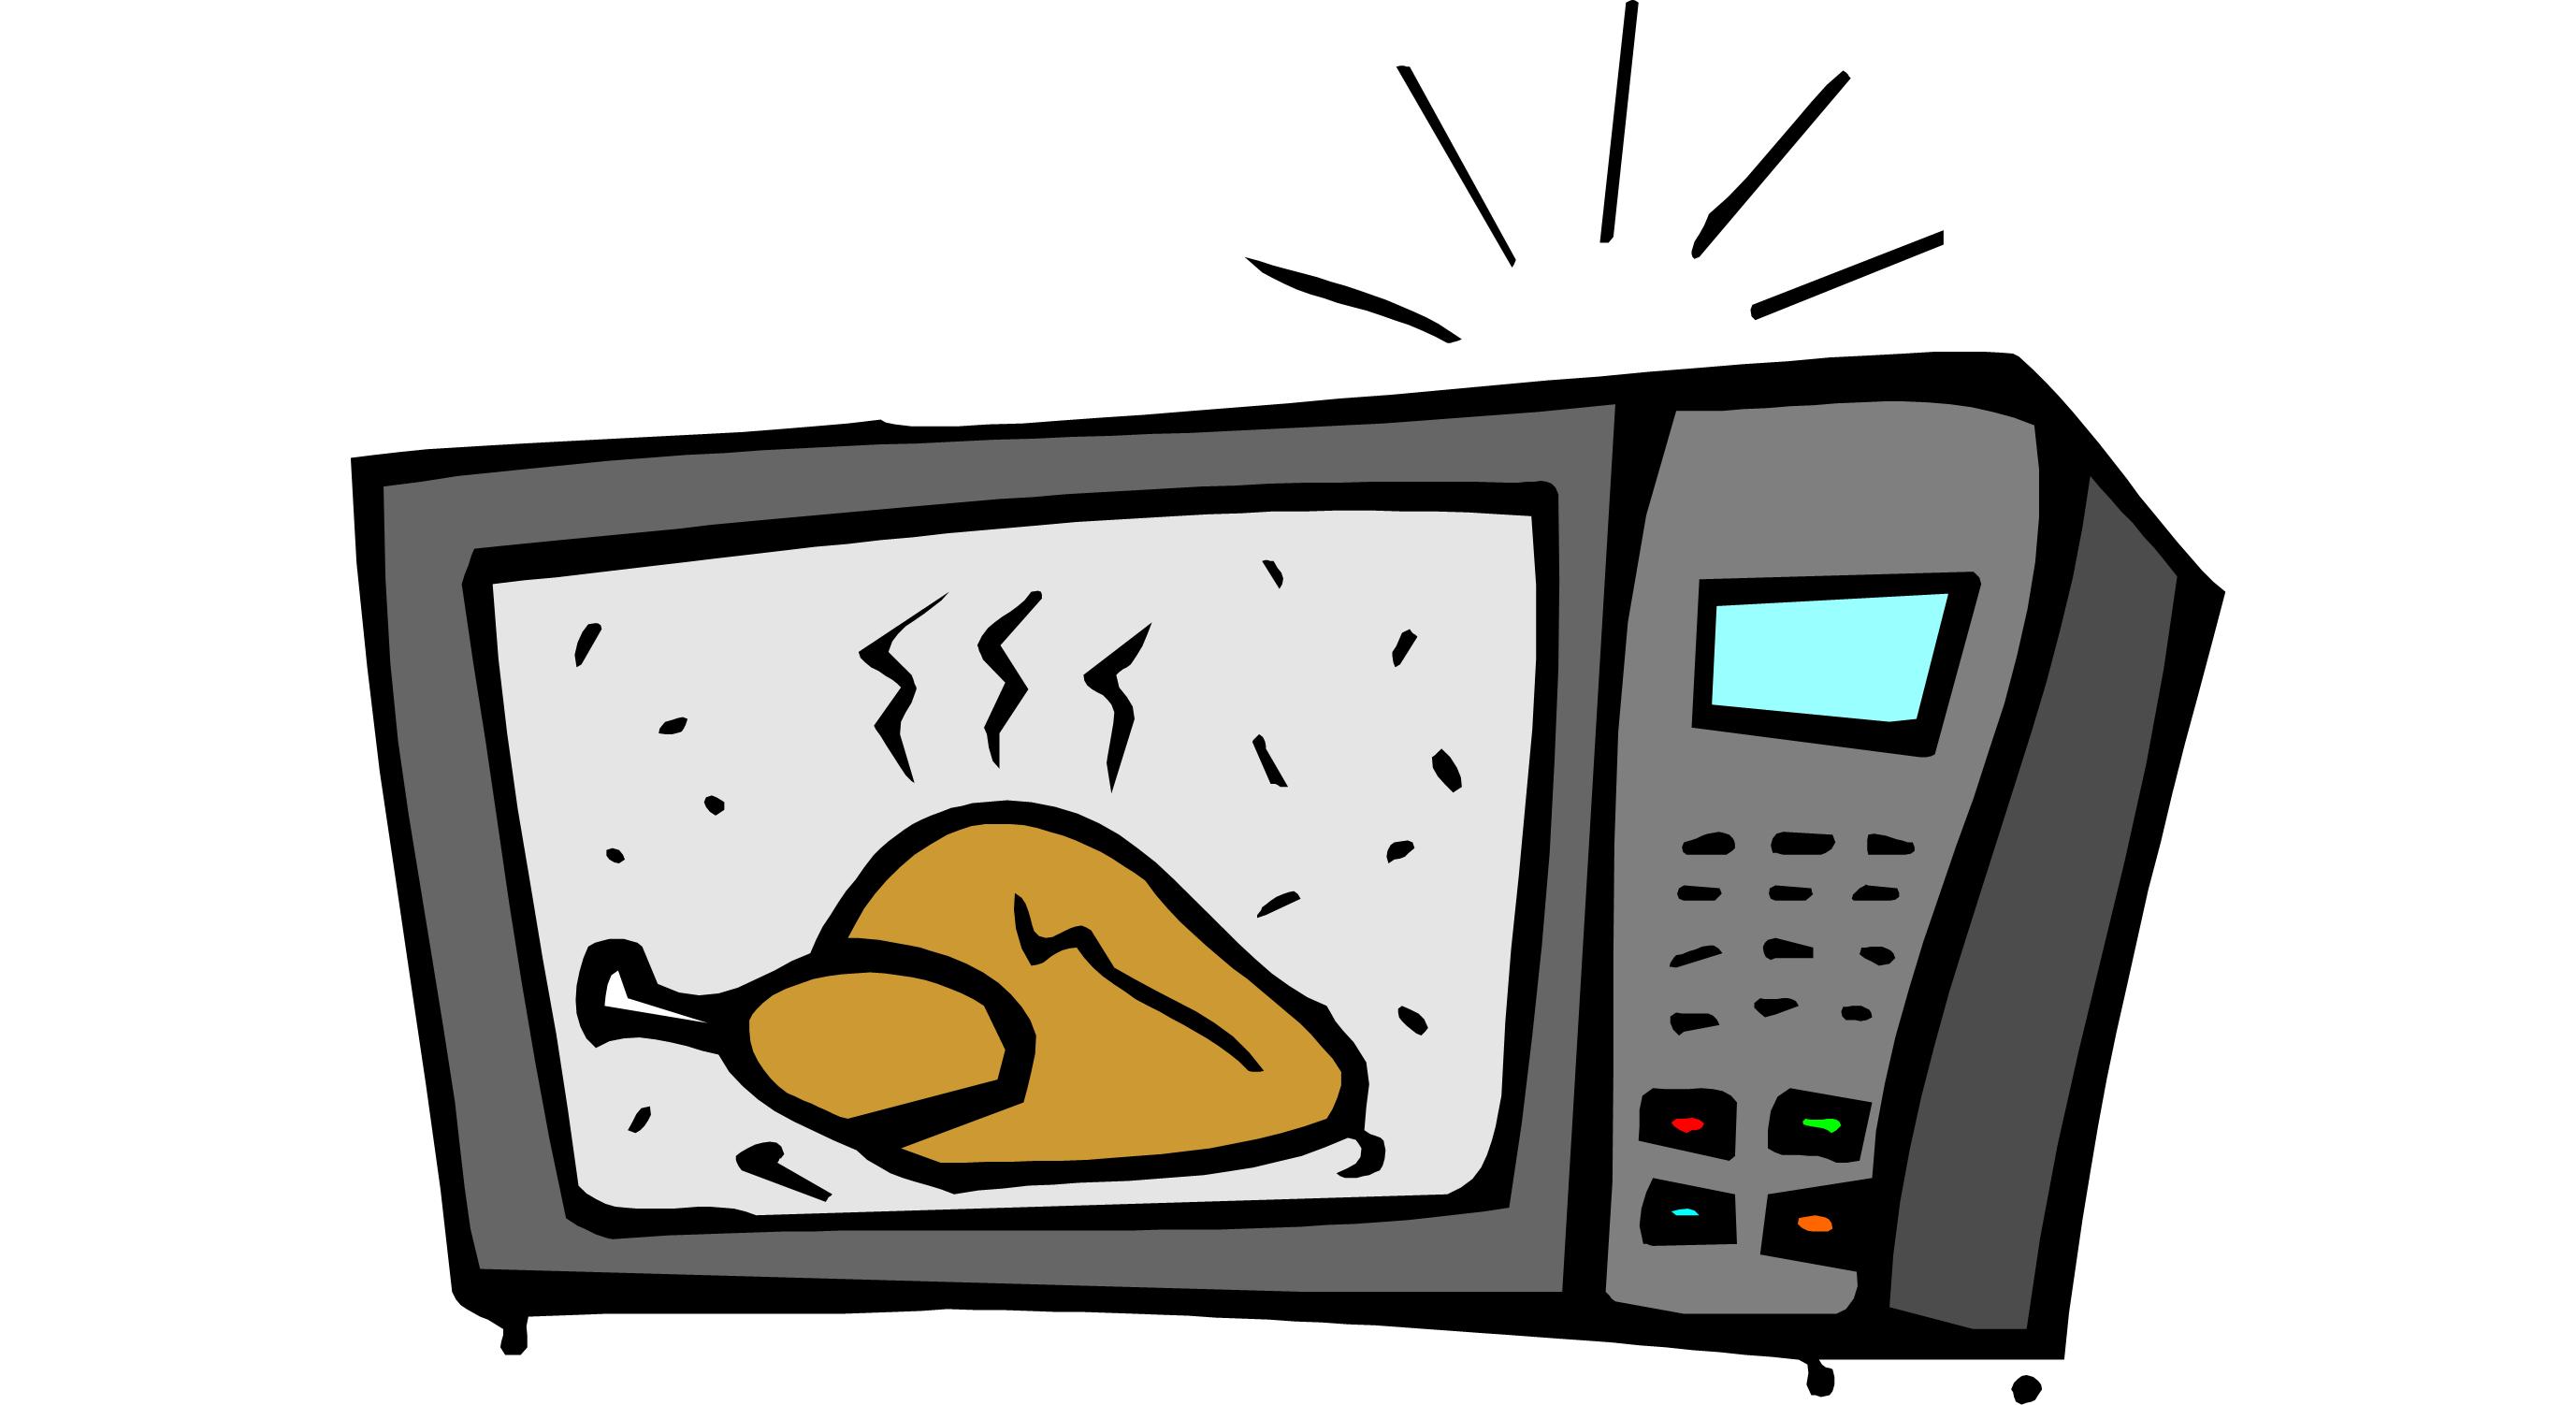 clipart of oven - photo #42